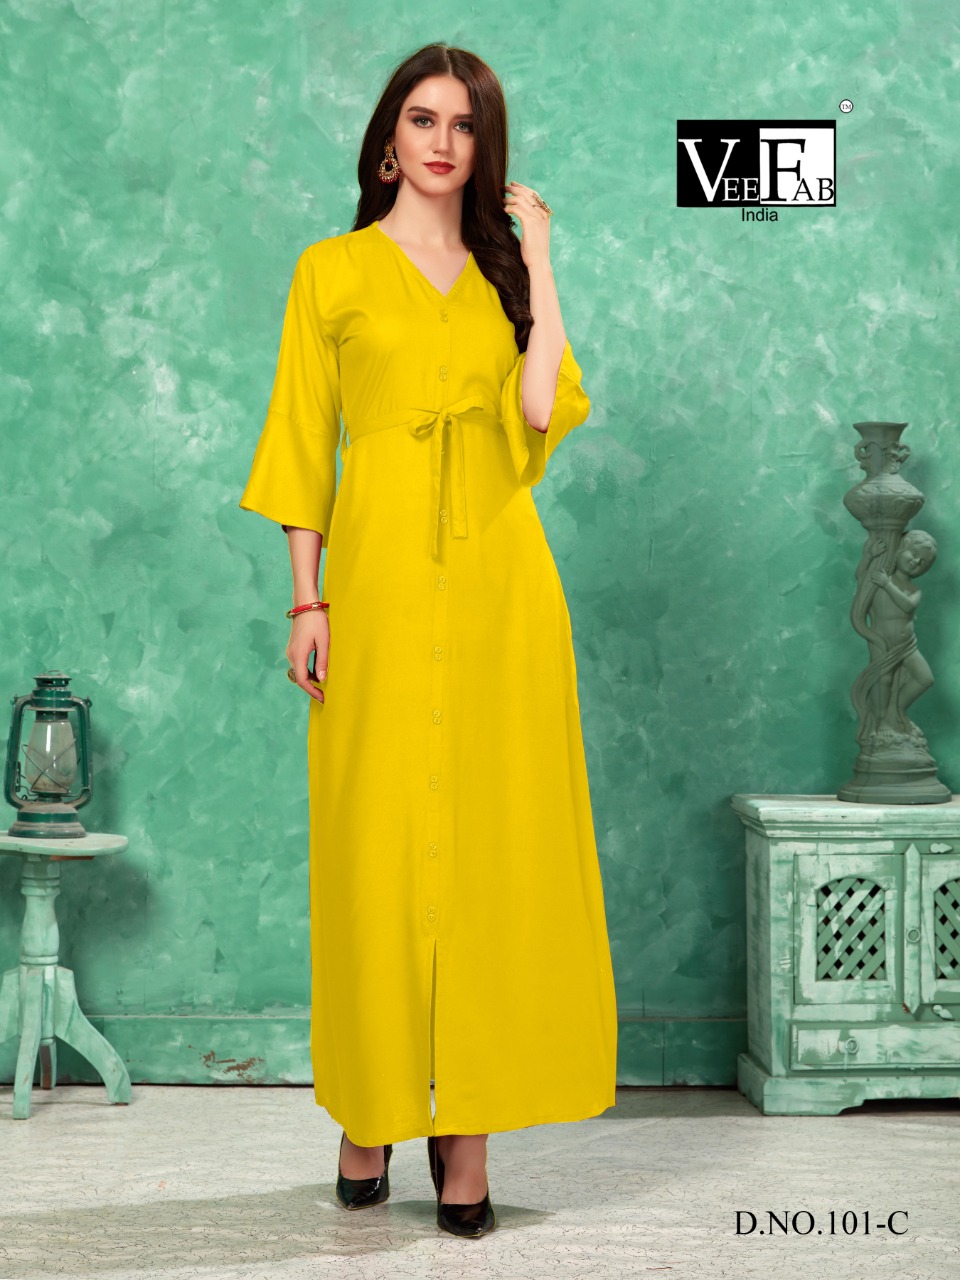 Vee Fab india colorbar vol-2 a new and stylish trendy look Gowns